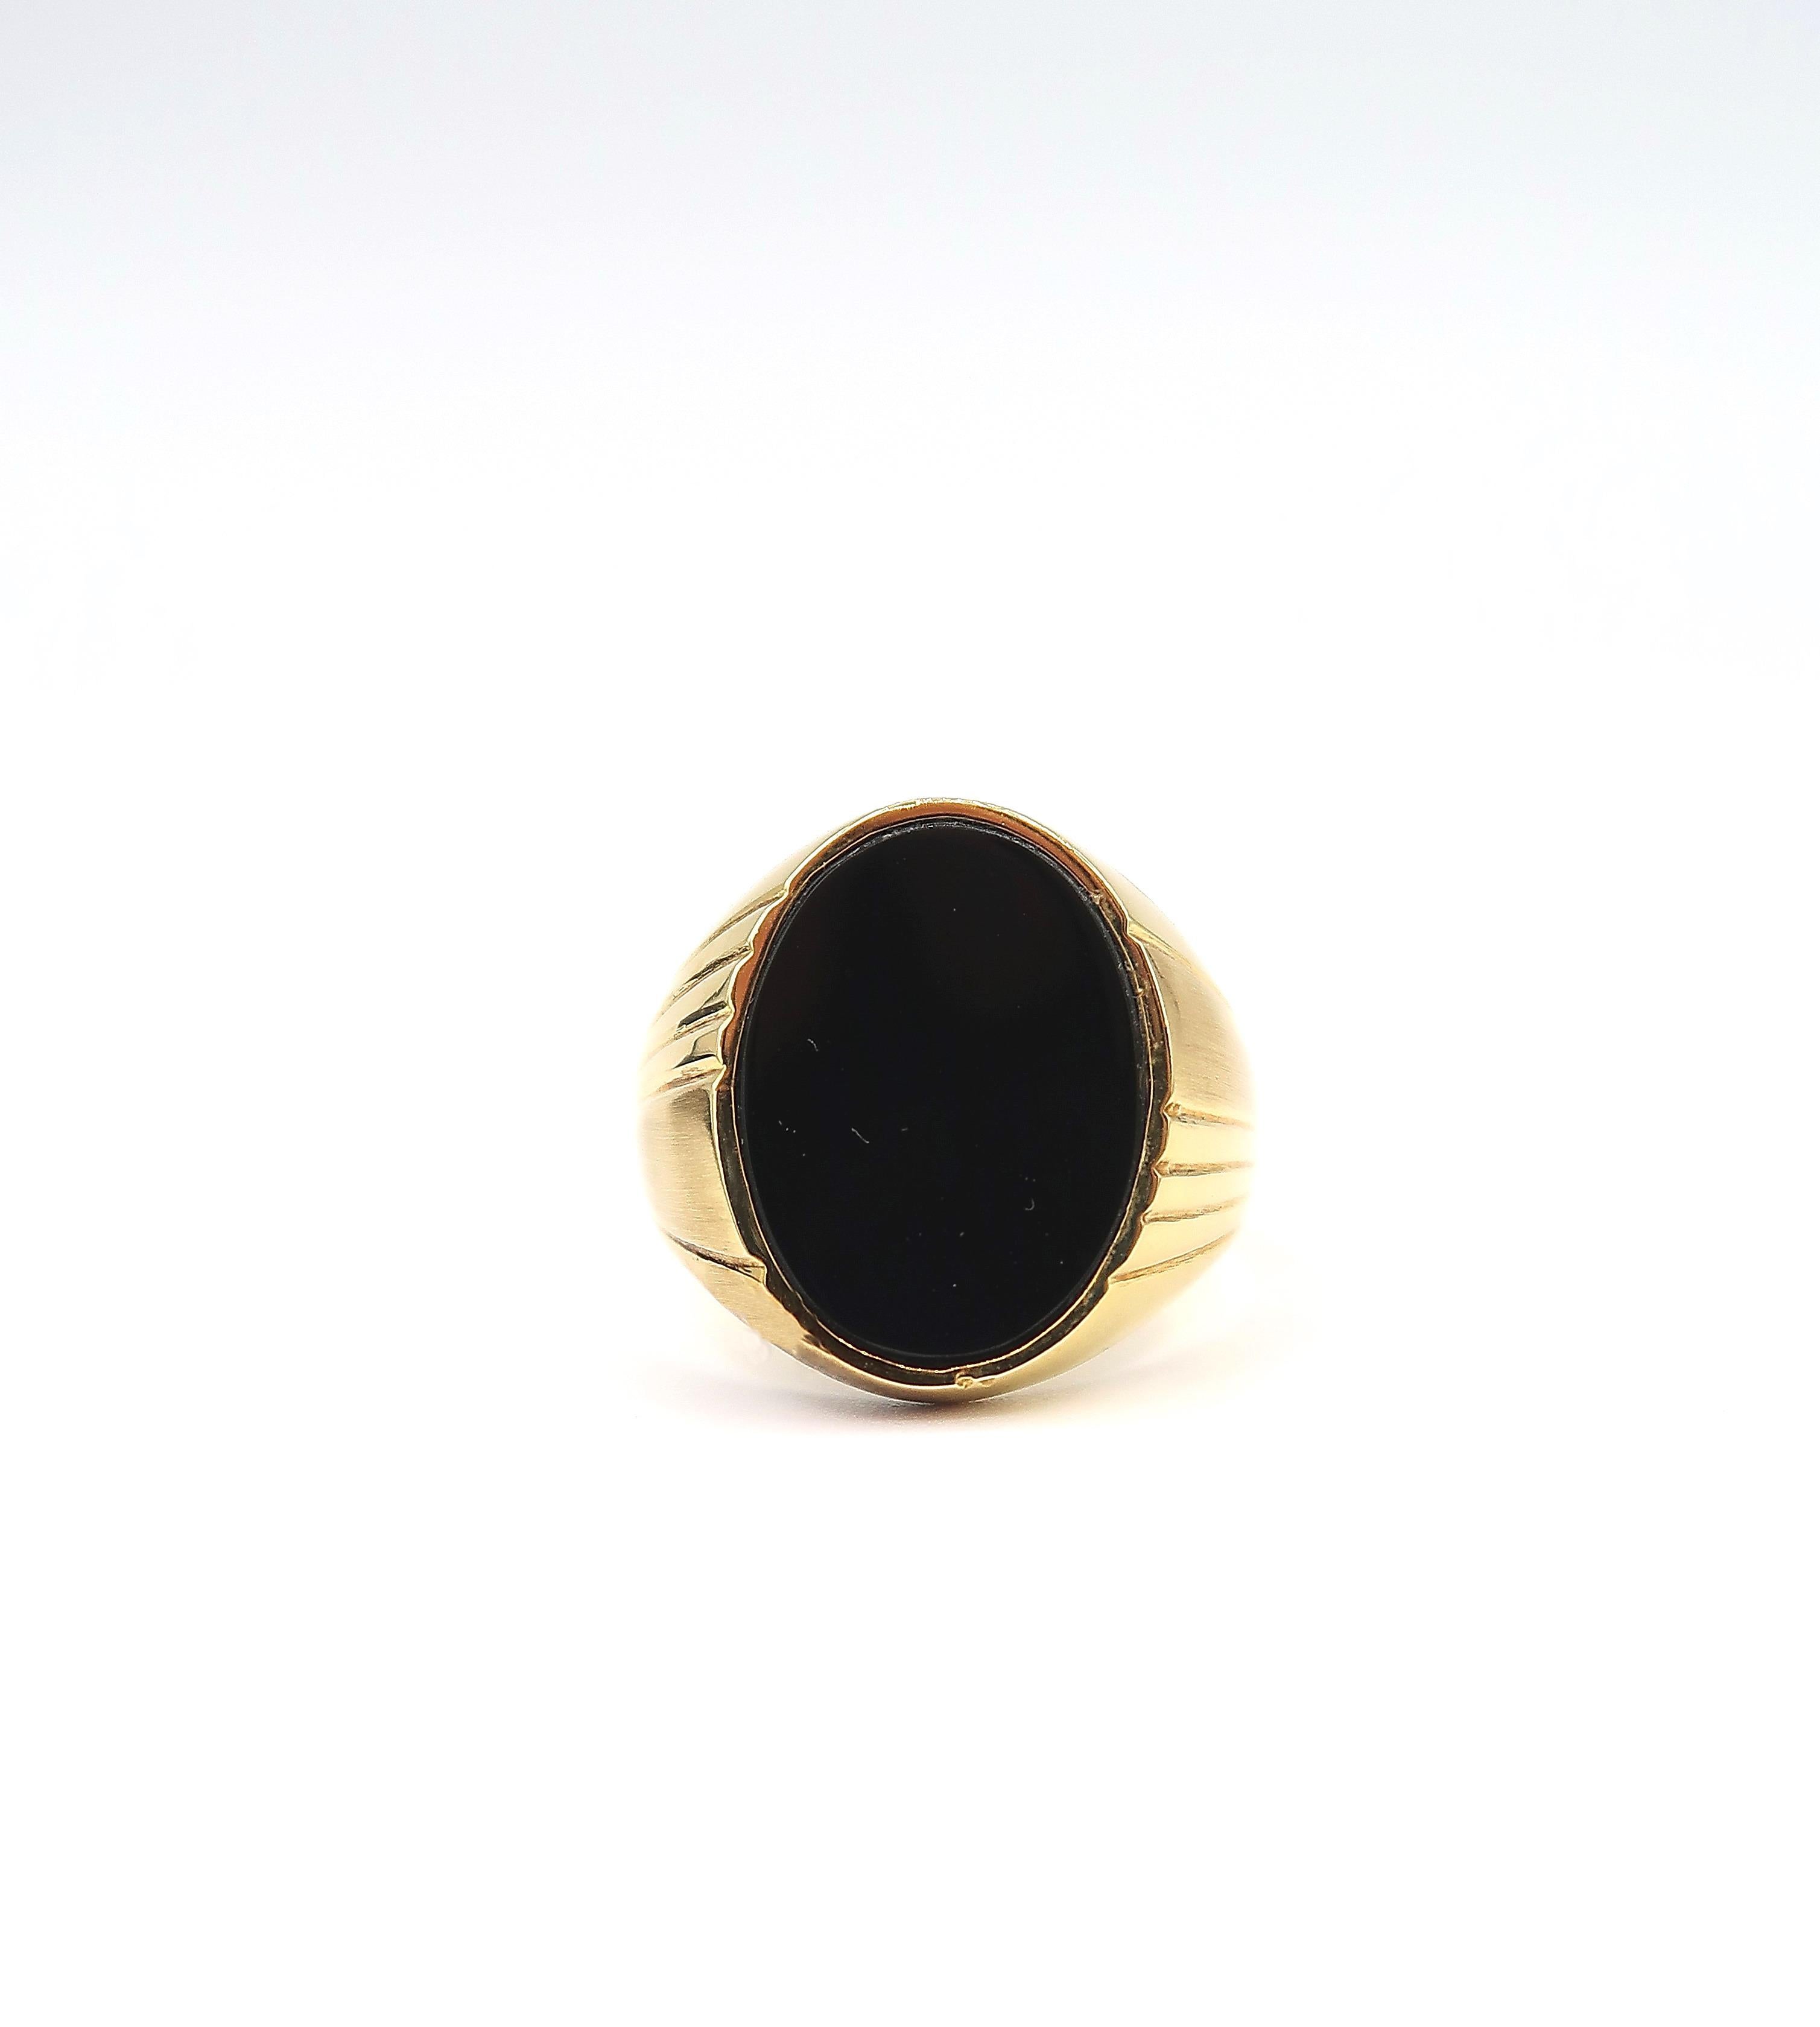 Oval Black Onyx Mens Signet Ring in 14 Karat Yellow Gold

Please let us know should you wish to have the ring resized or engraved. 

Ring size: US 8.5, UK Q

Gold: 14K 6.12g.
Onyx: 1 pc.